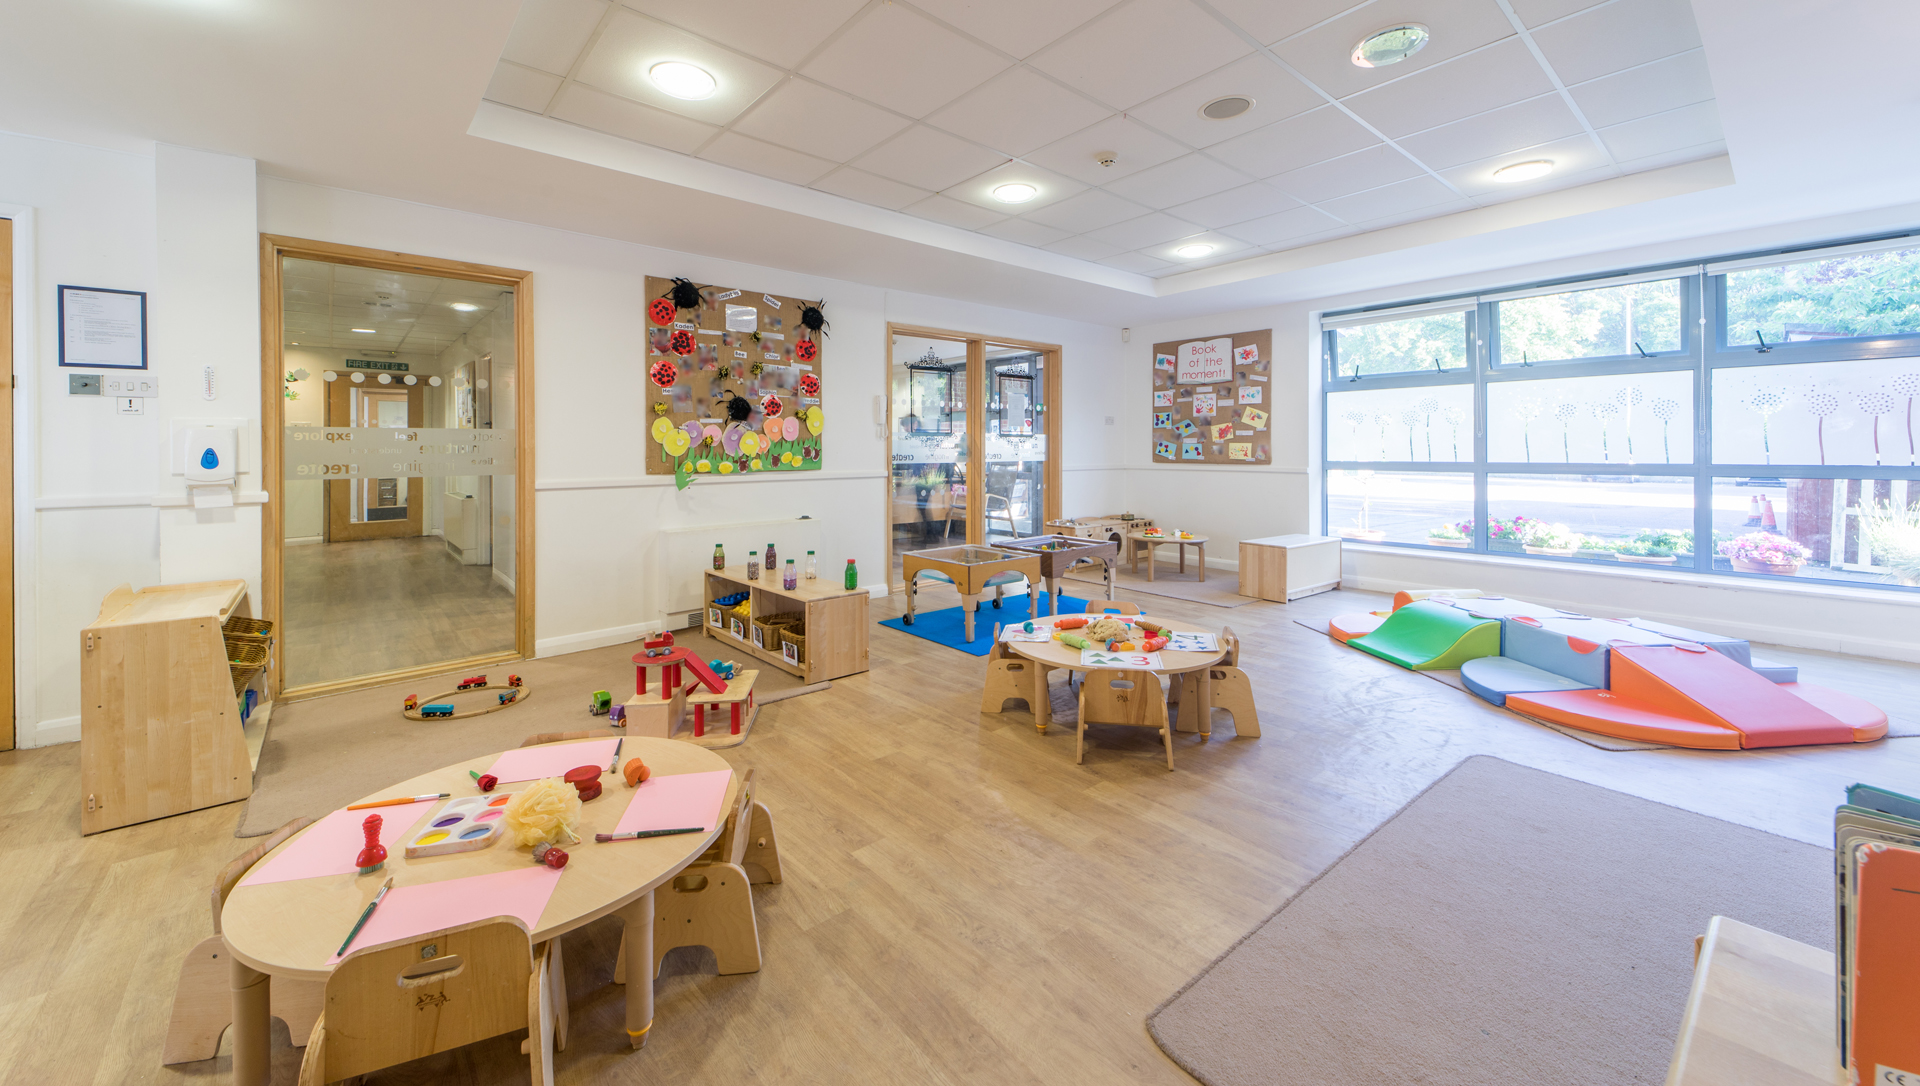 Bright Horizons Epping Nursery Images